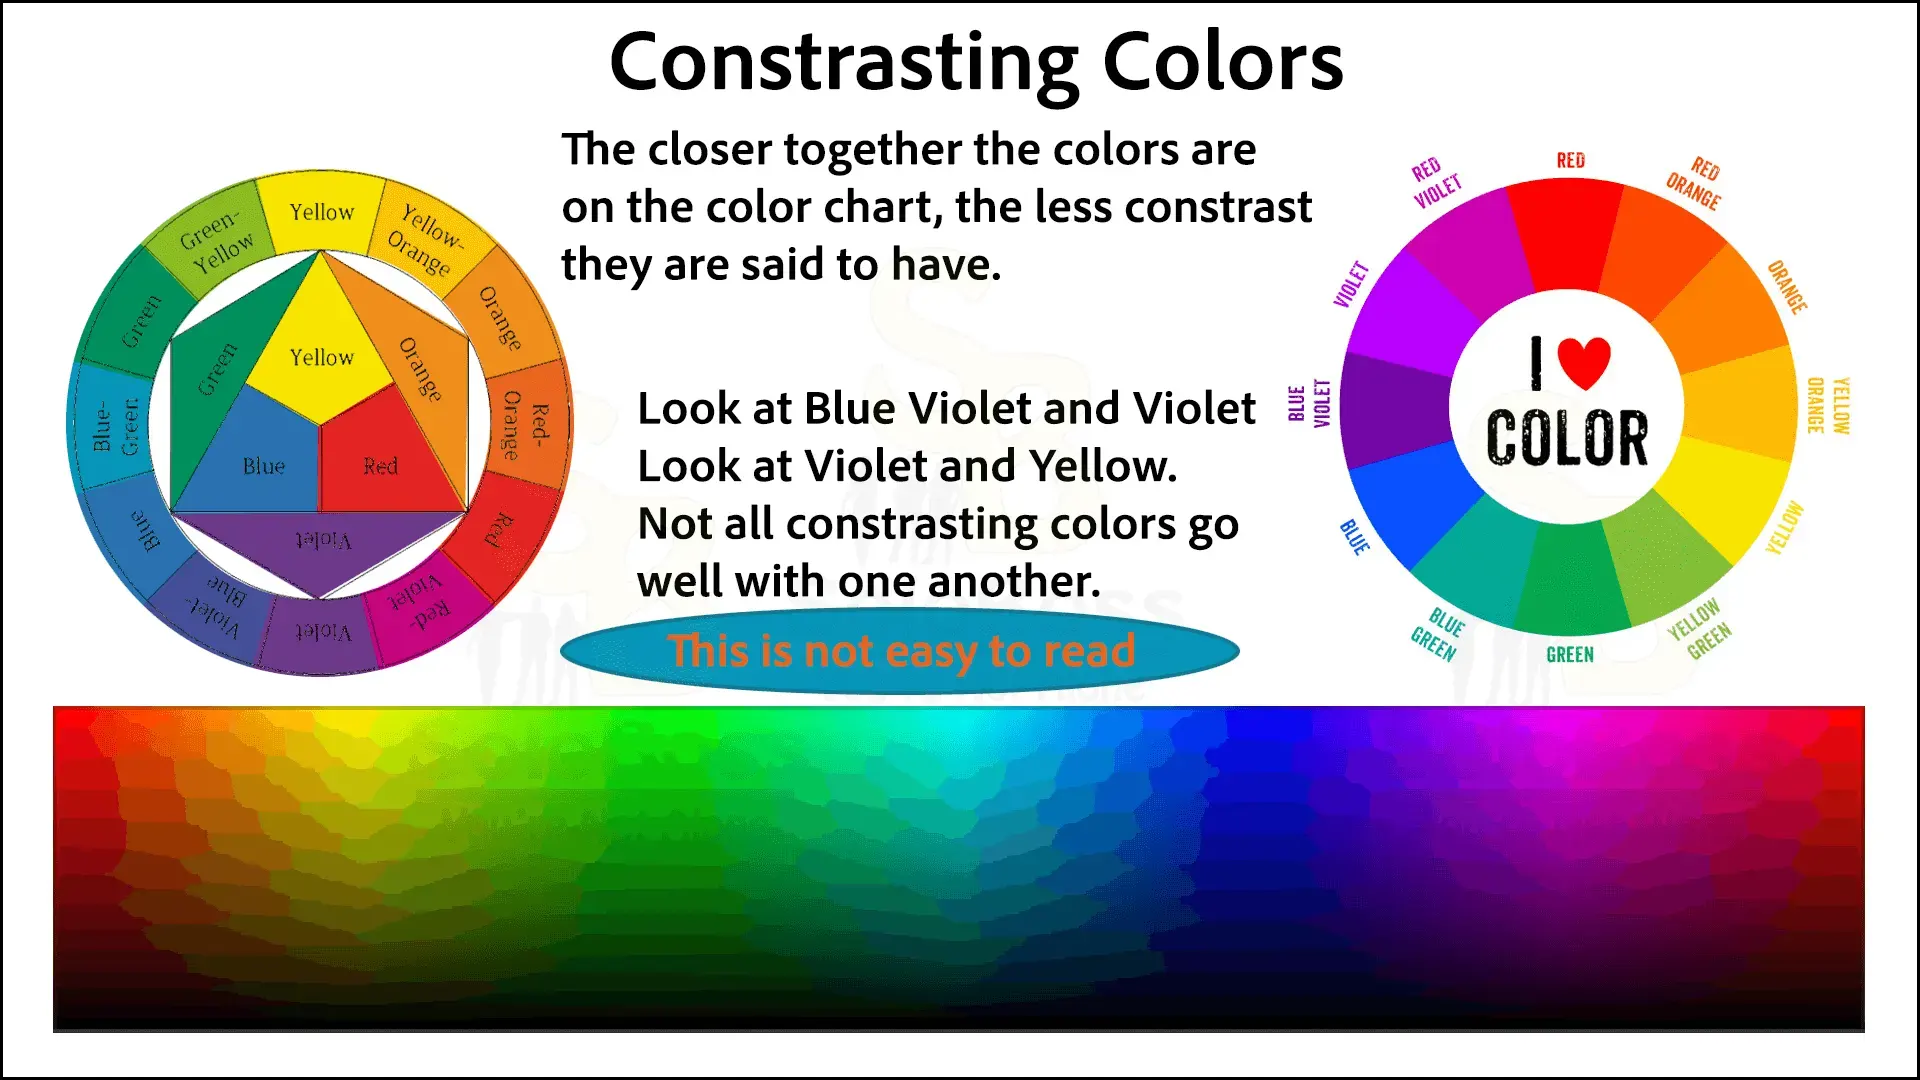 Demonstrates google and bad use of contrasting colors. Showing not all contrasting colors work correctly.